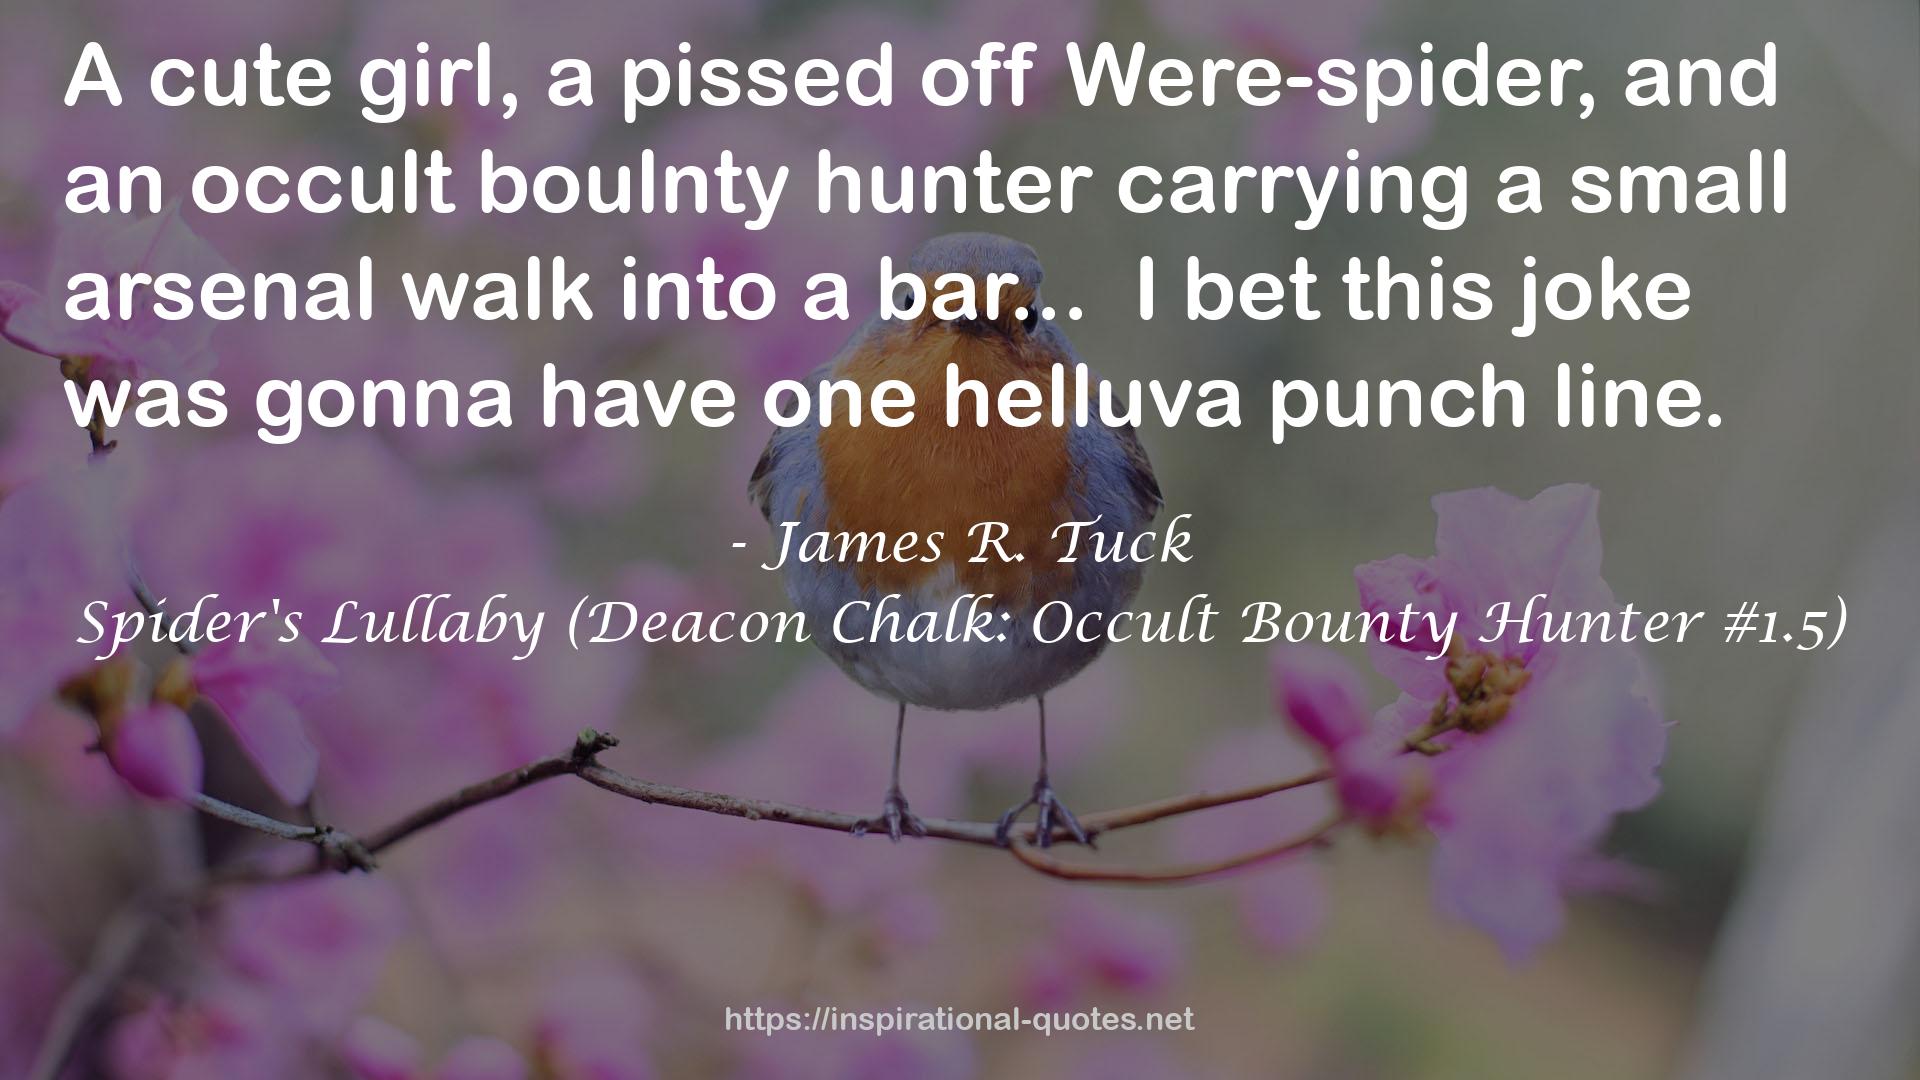 Spider's Lullaby (Deacon Chalk: Occult Bounty Hunter #1.5) QUOTES